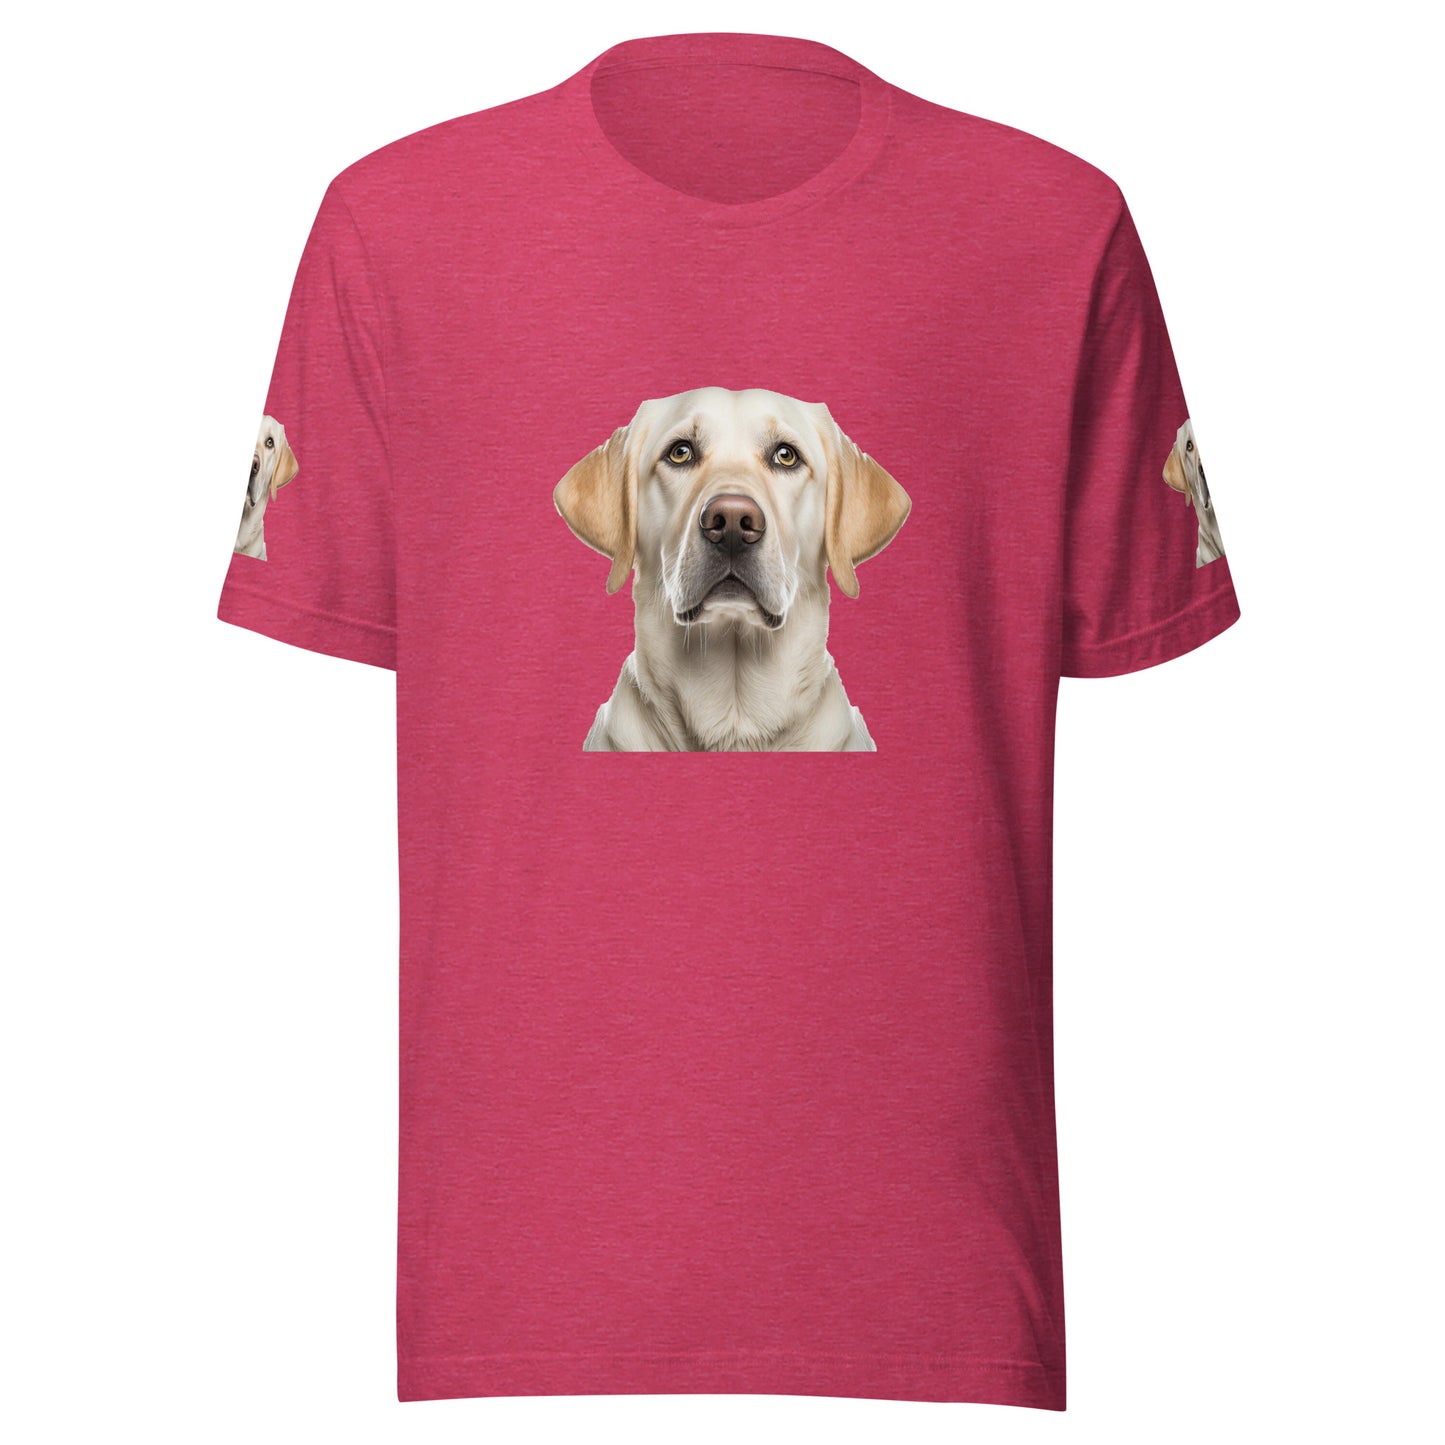 Women and Men's (Unisex) T-Shirt printed the portrait of a Labrador